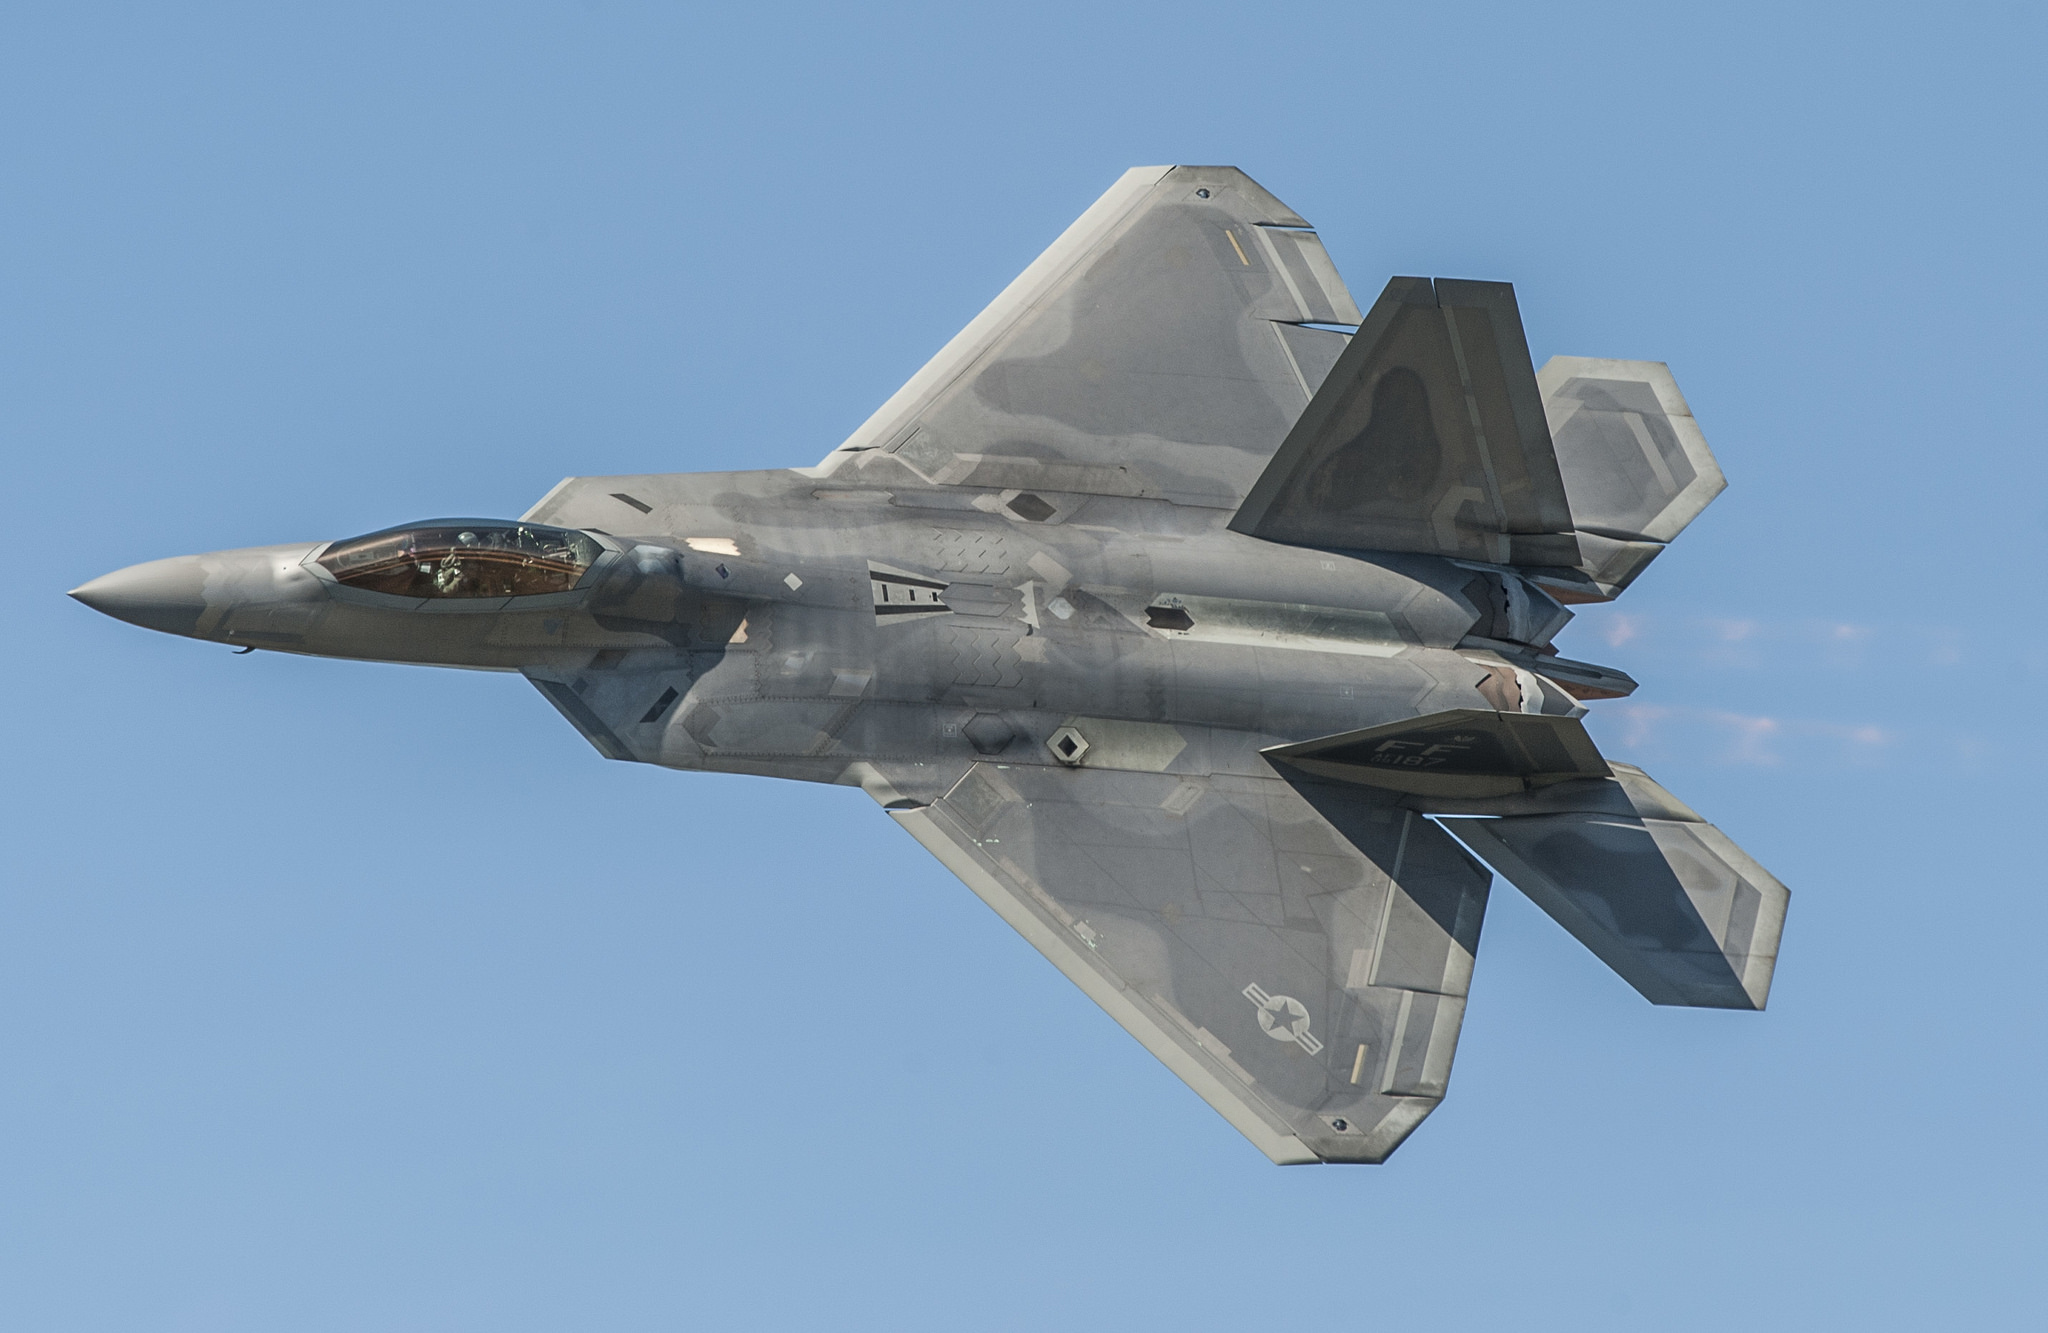 General 2048x1333 US Air Force F-22 Raptor military aircraft military vehicle aircraft military vehicle jet fighter Lockheed Martin American aircraft